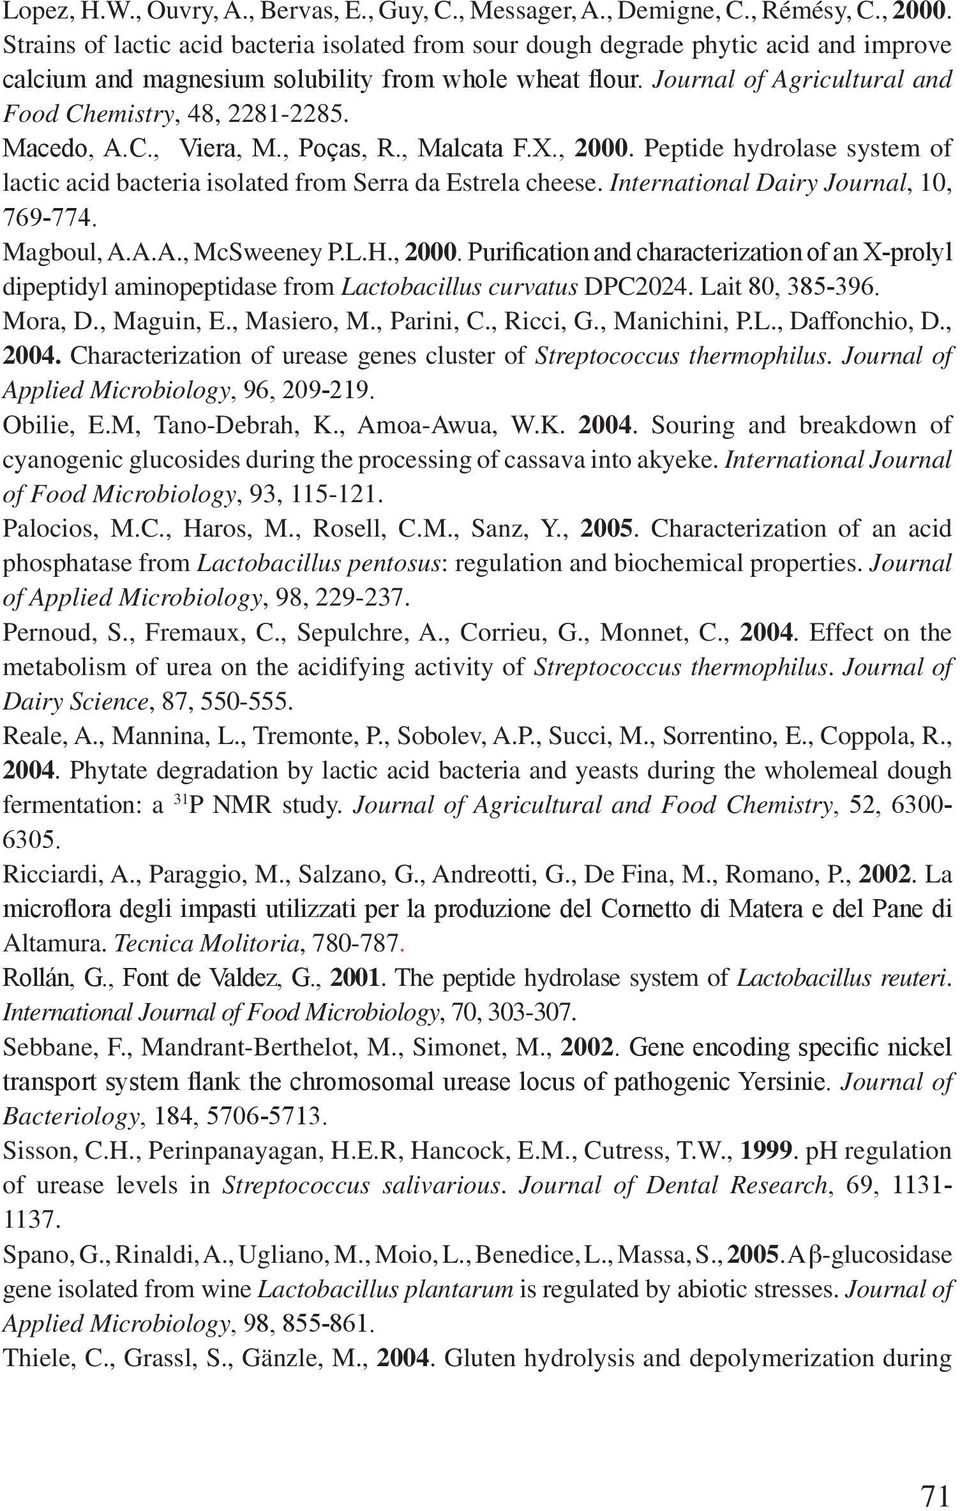 Journal of Agricultural and Food Chemistry, 48, 2281-2285. Macedo, A.C., Viera, M., Poças, R., Malcata F.X., 2000.